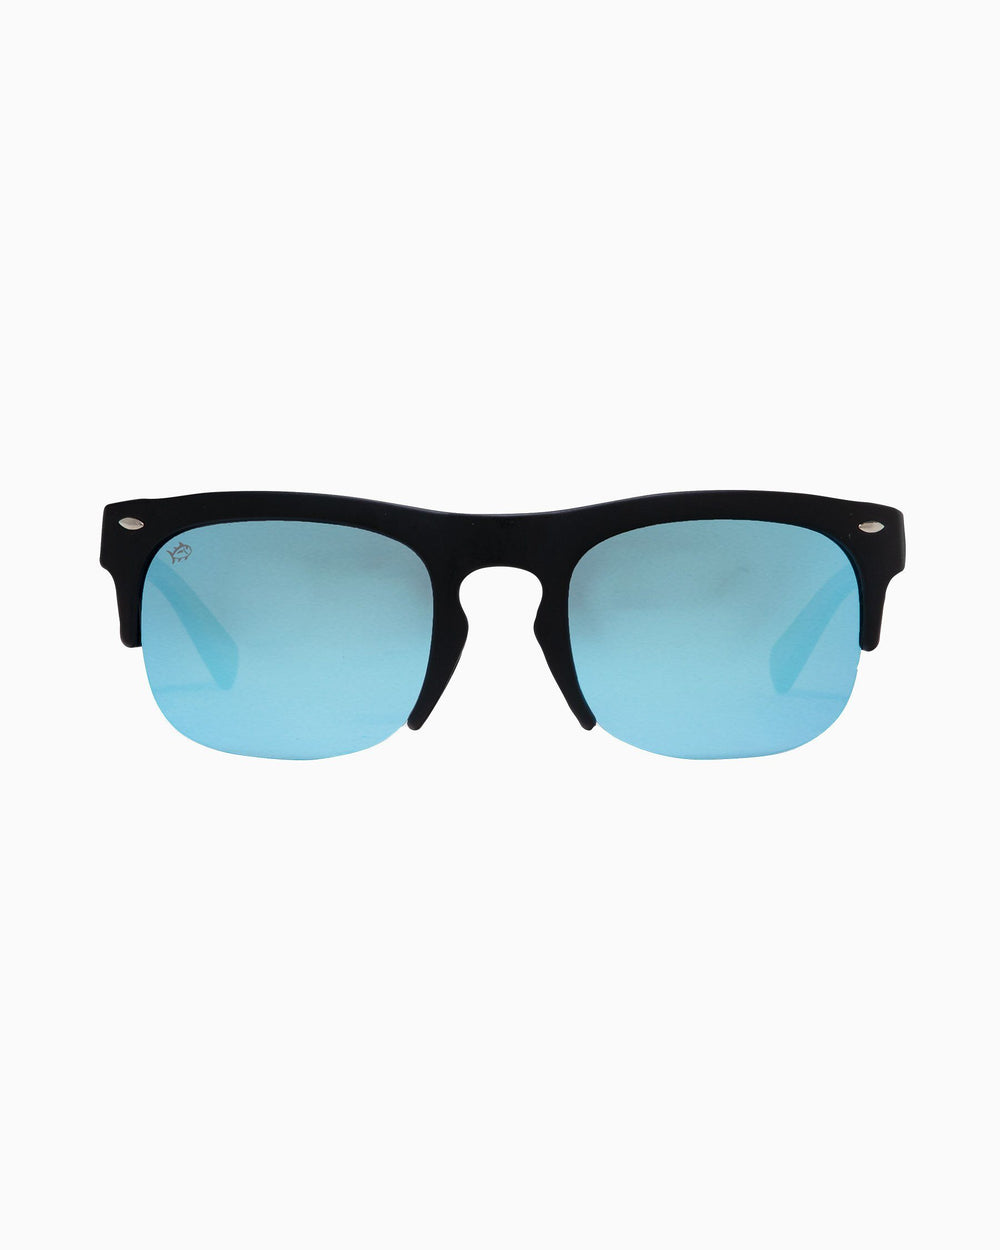 The front of the Men's Rheos Sullivans Sunglasses by Southern Tide - Gunmetal Marine